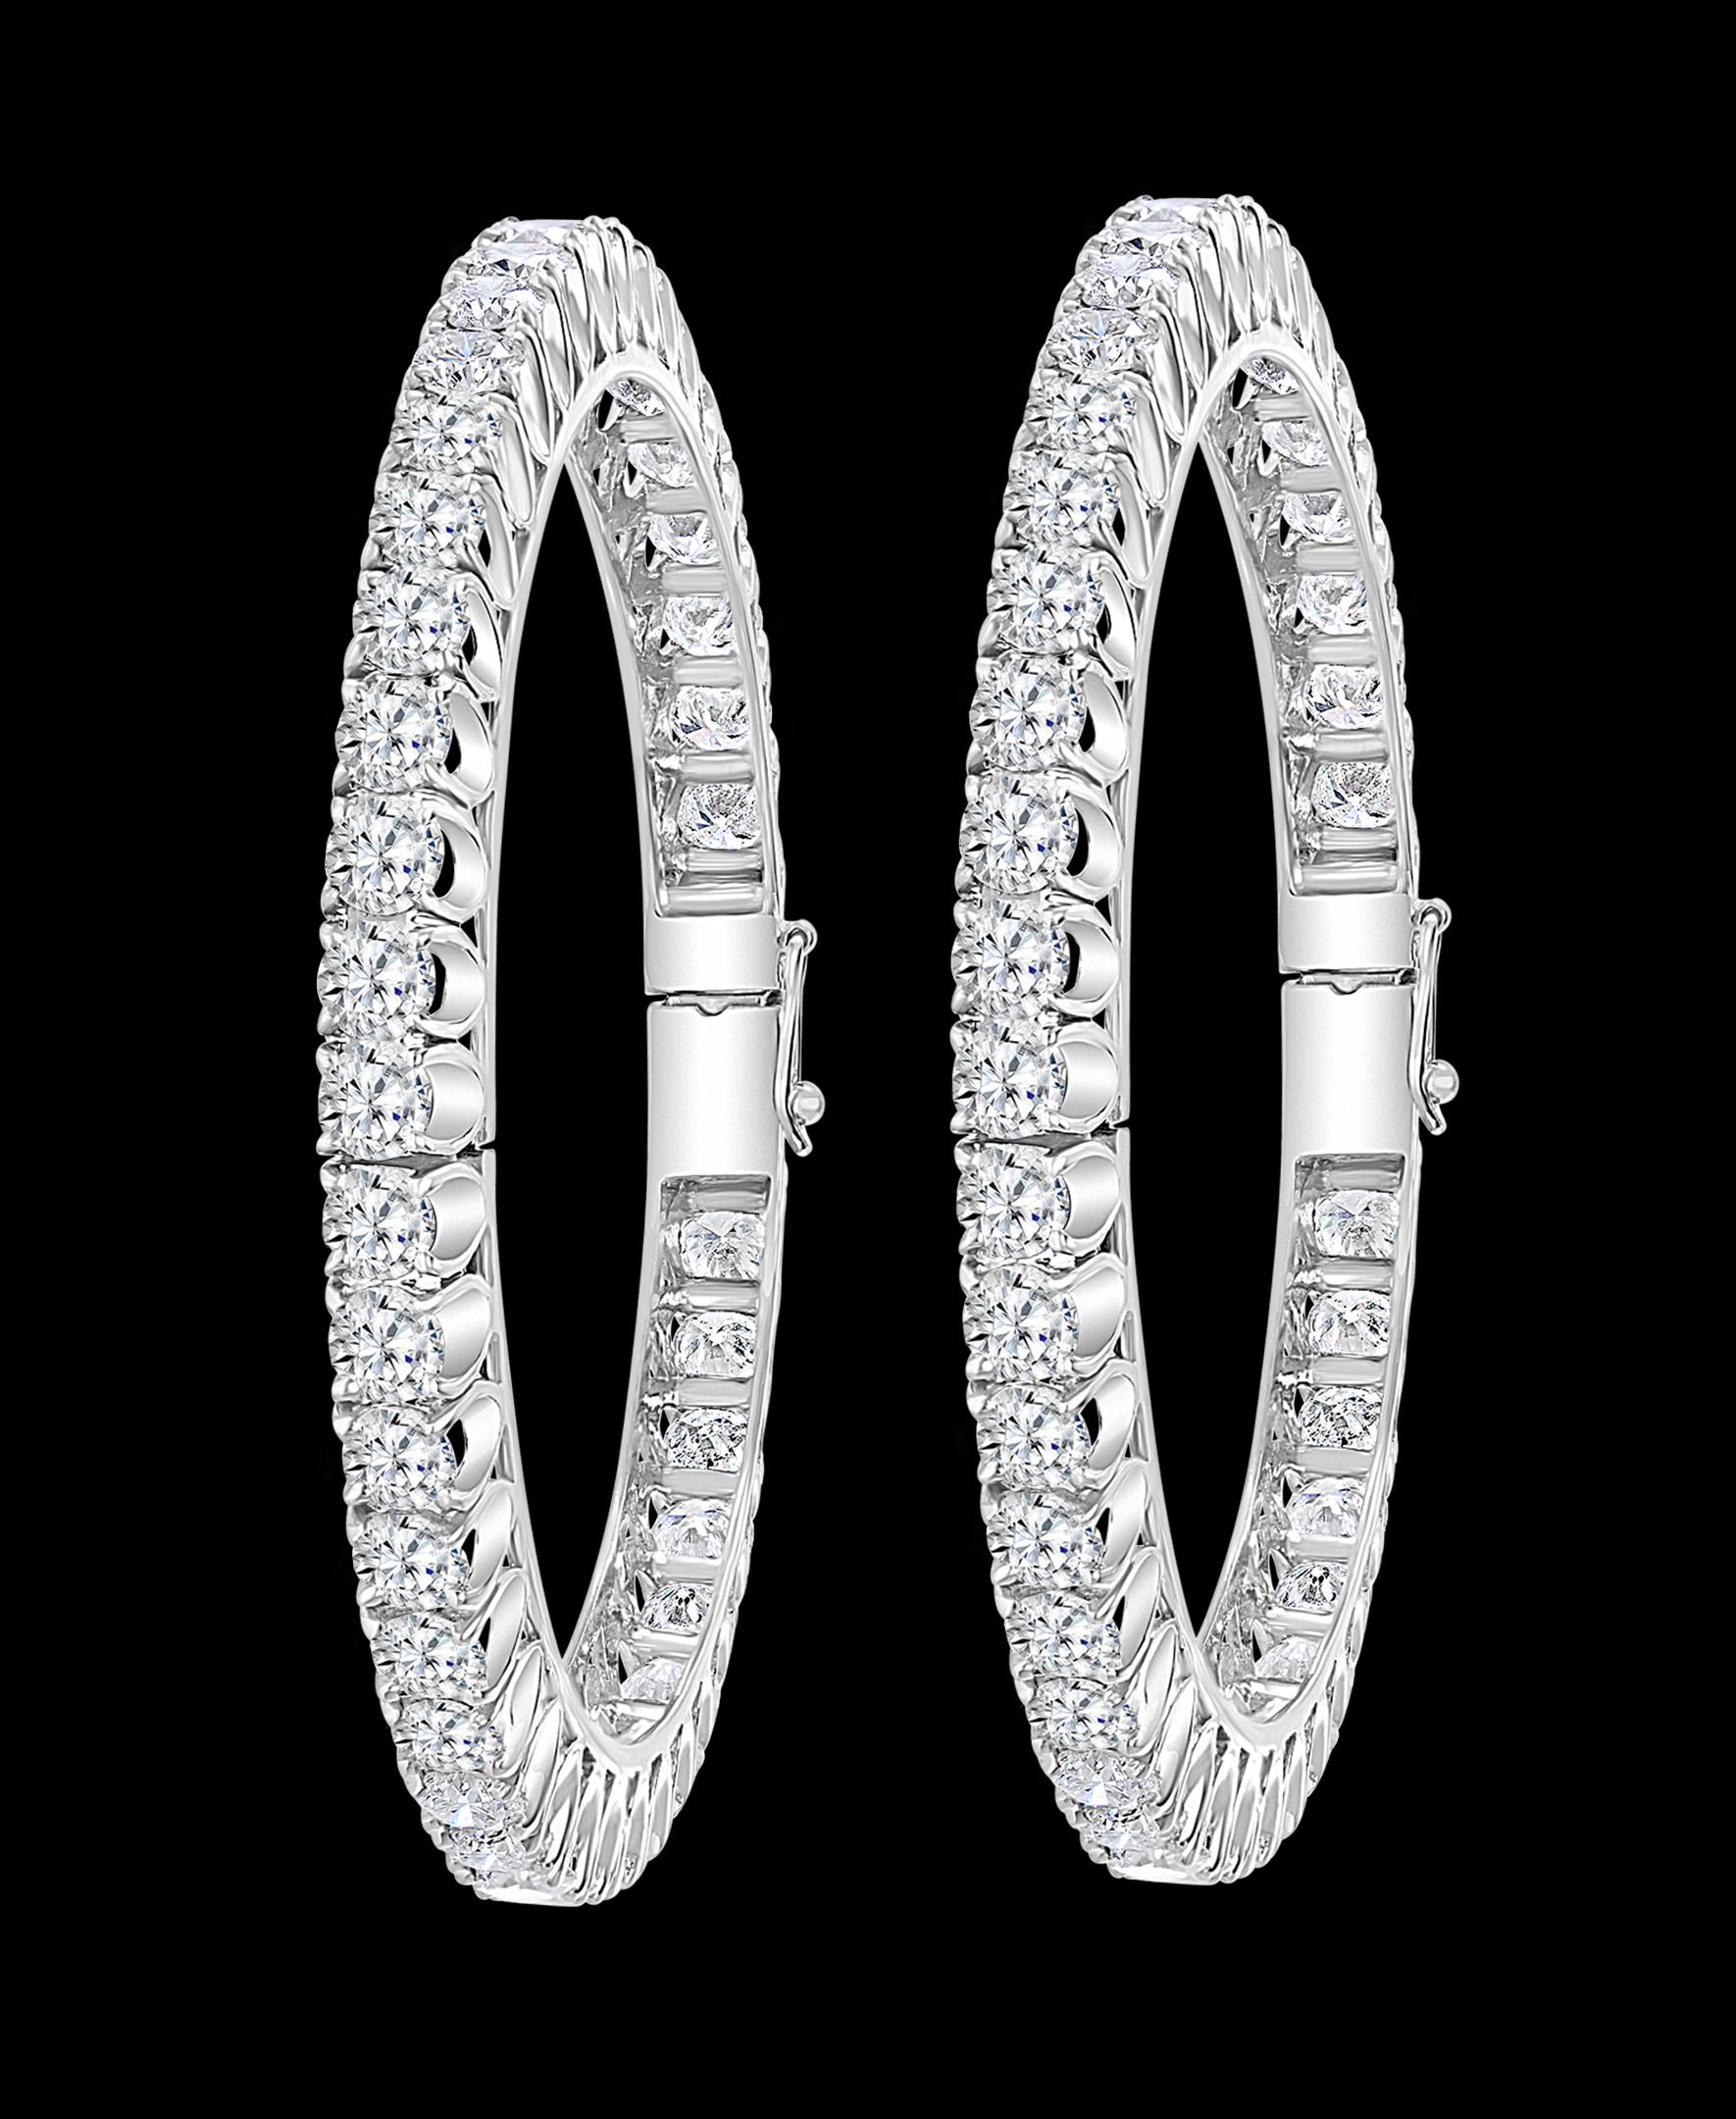 Single line 40 pointer  each , 35.73 Ct Contemporary  18 Karat  White  Gold & Diamond  Eternity Bangle Bracelet 
It features Two  bangles  crafted from  18k White gold   embedded with  35.73  Carats of  Round brilliant diamonds in two bangles . 
The